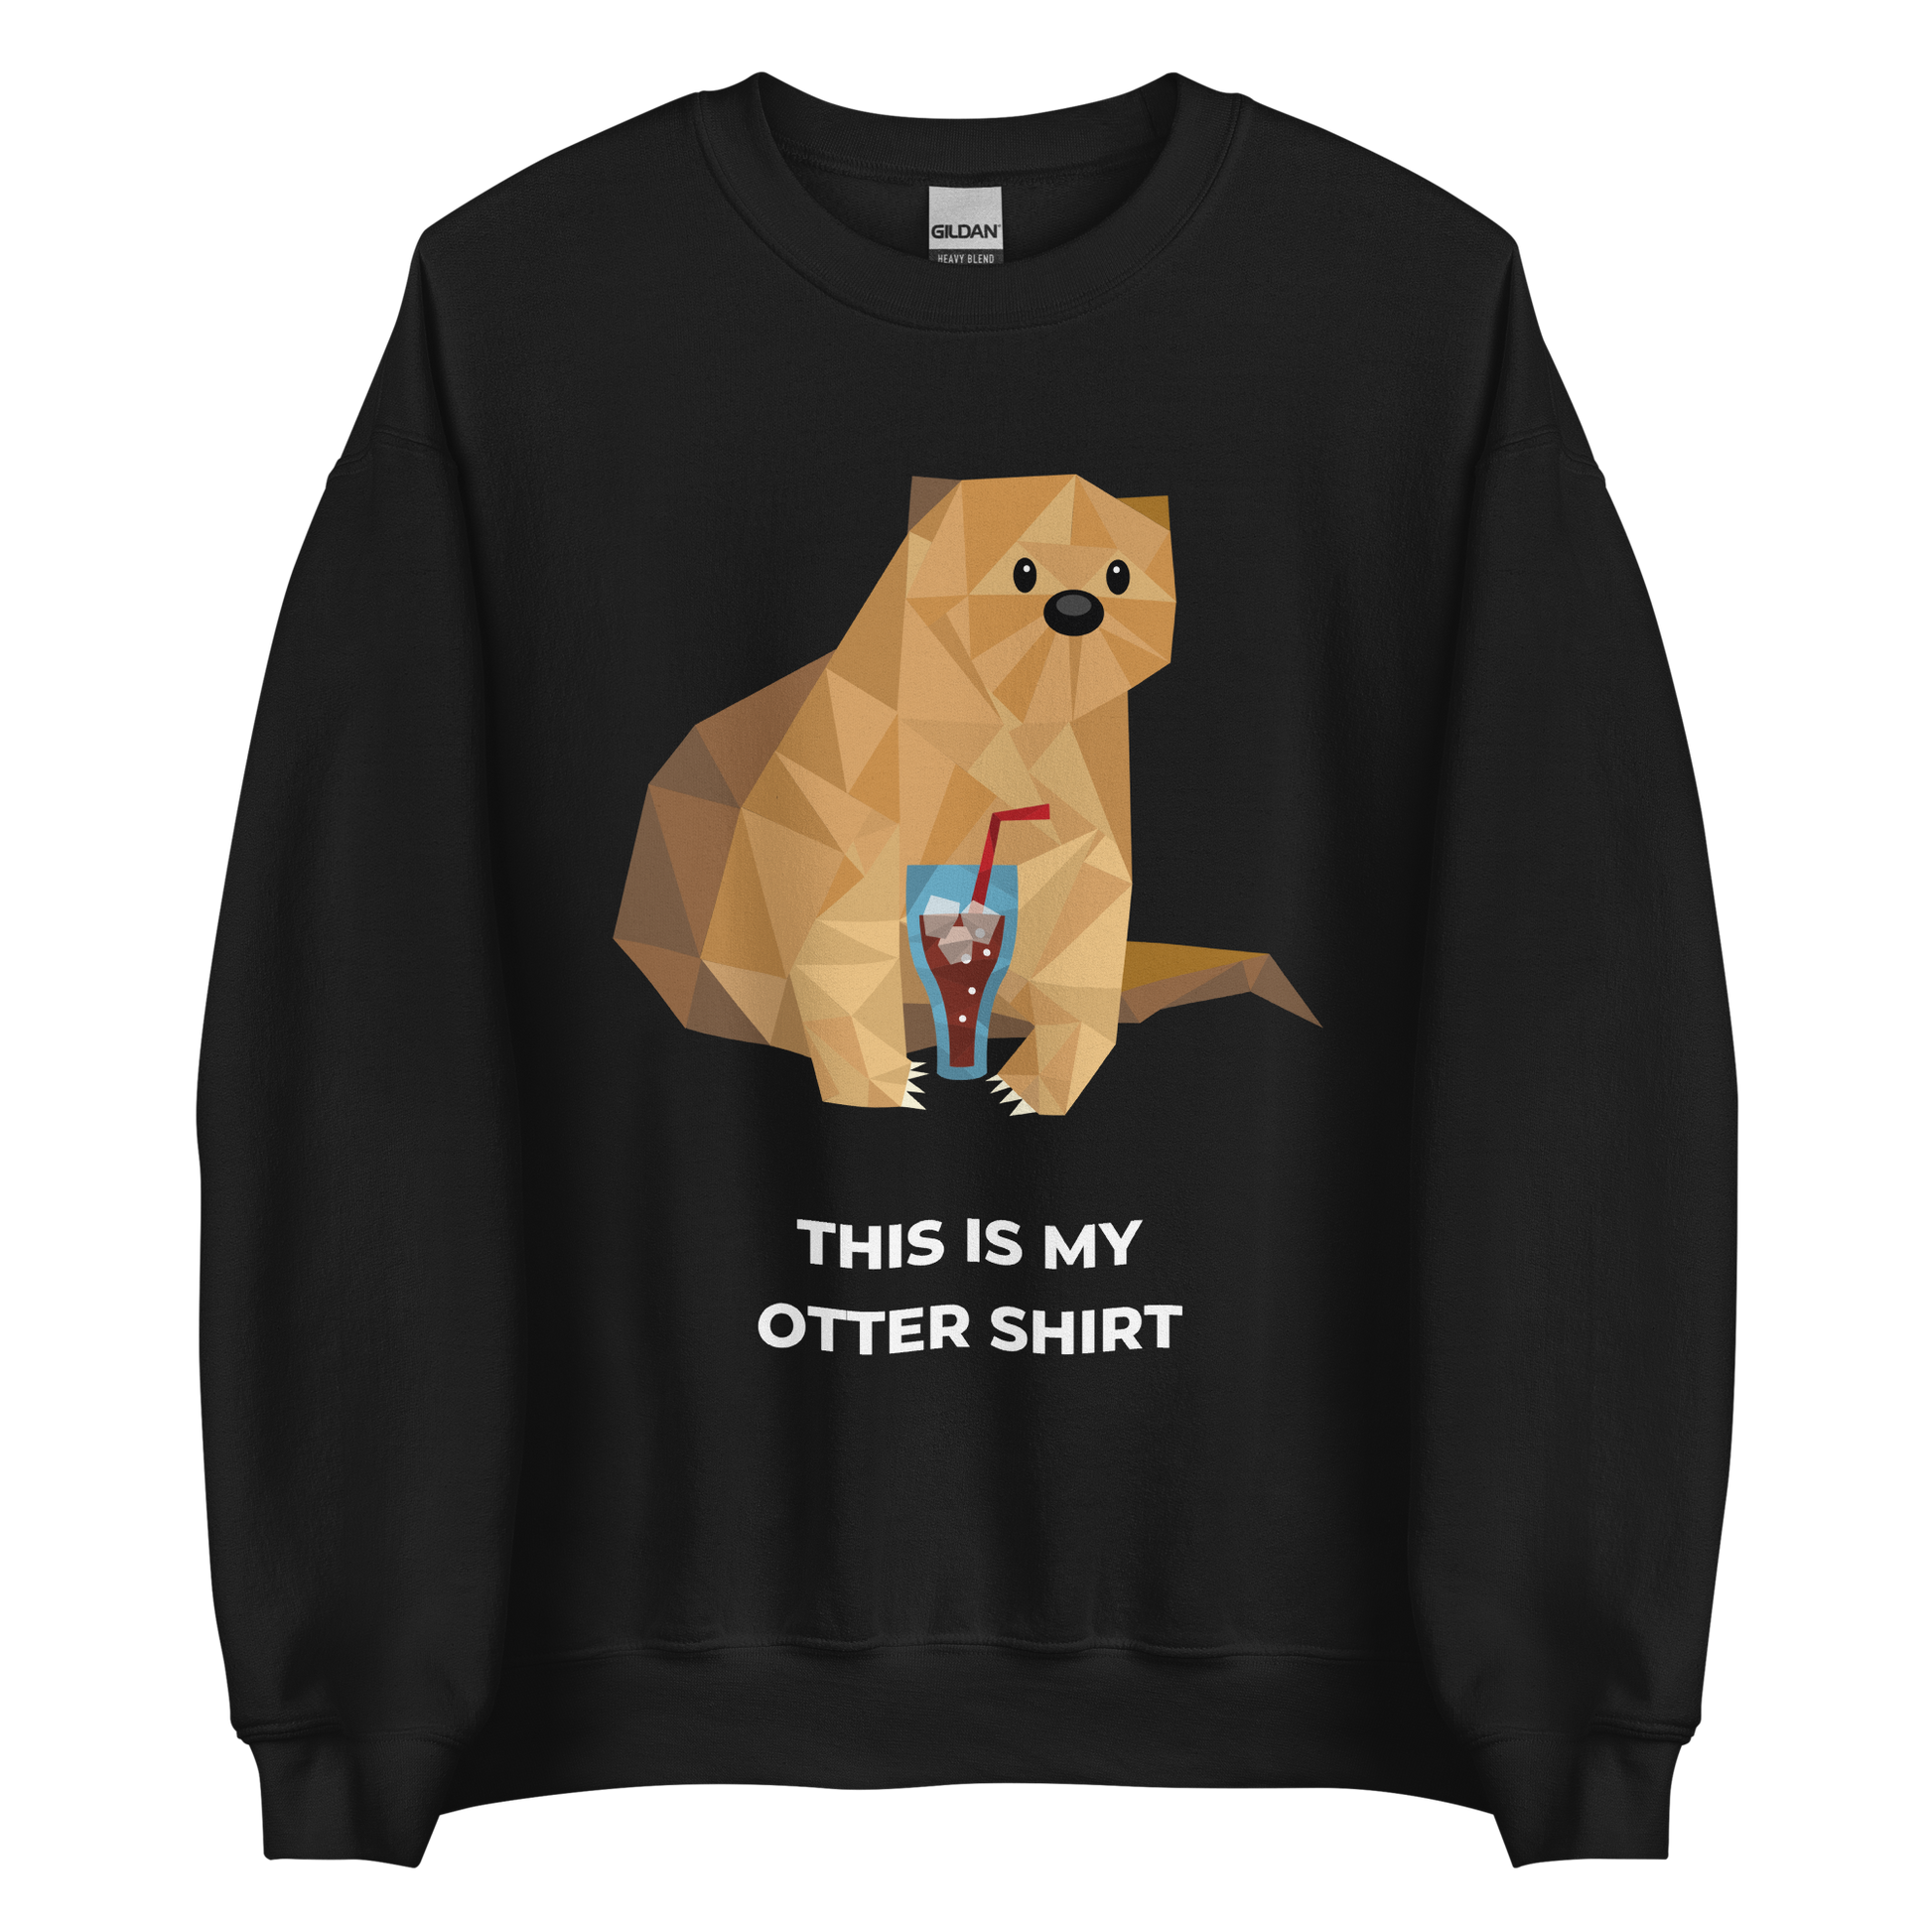 Black Otter Sweatshirt featuring an adorable This Is My Otter Shirt graphic on the chest - Funny Graphic Otter Sweatshirts - Boozy Fox